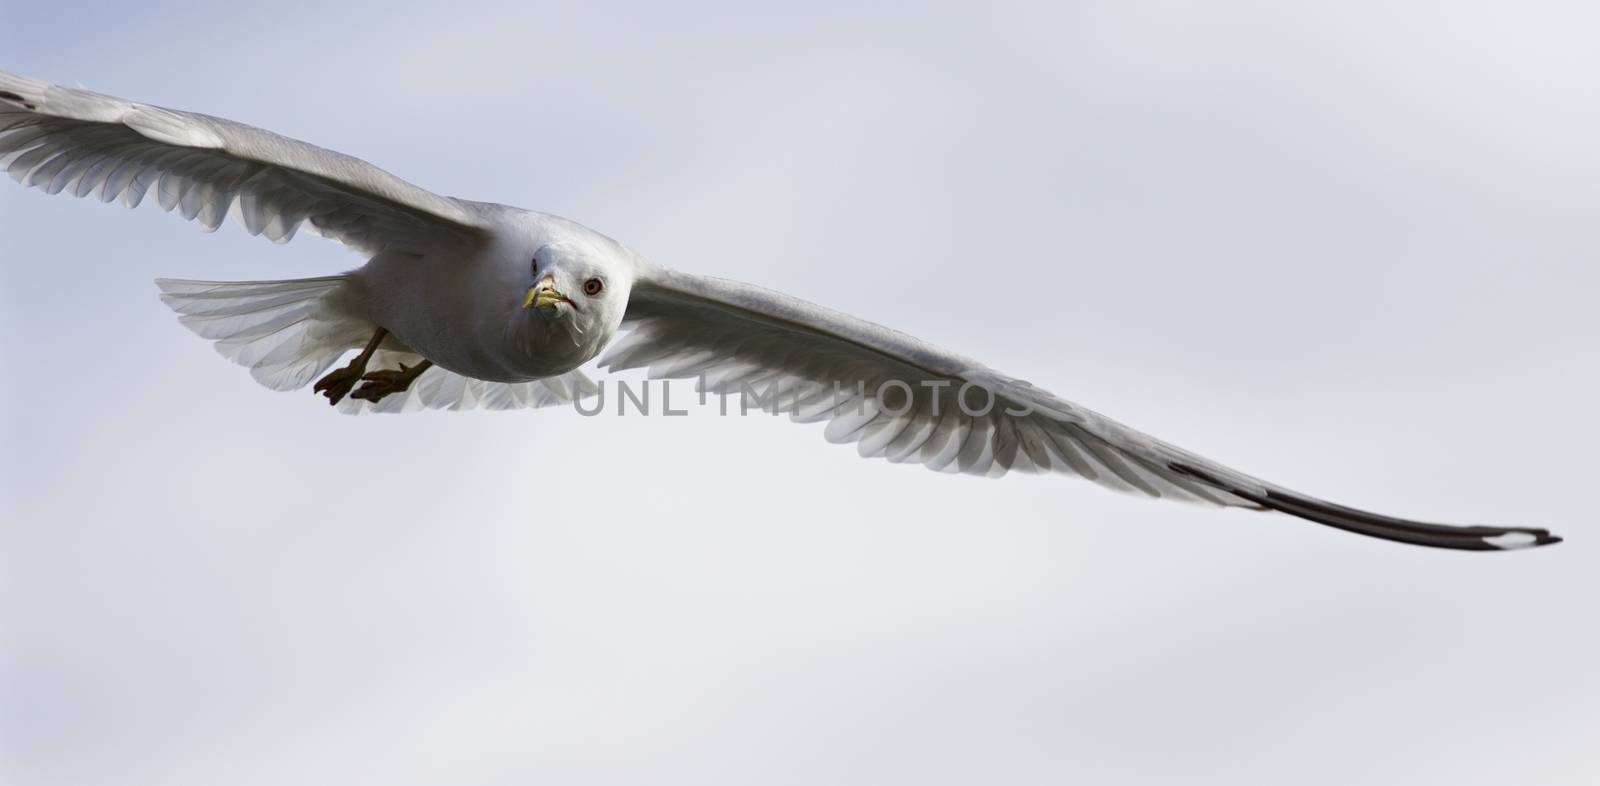 Very beautiful isolated image with the flying gull by teo